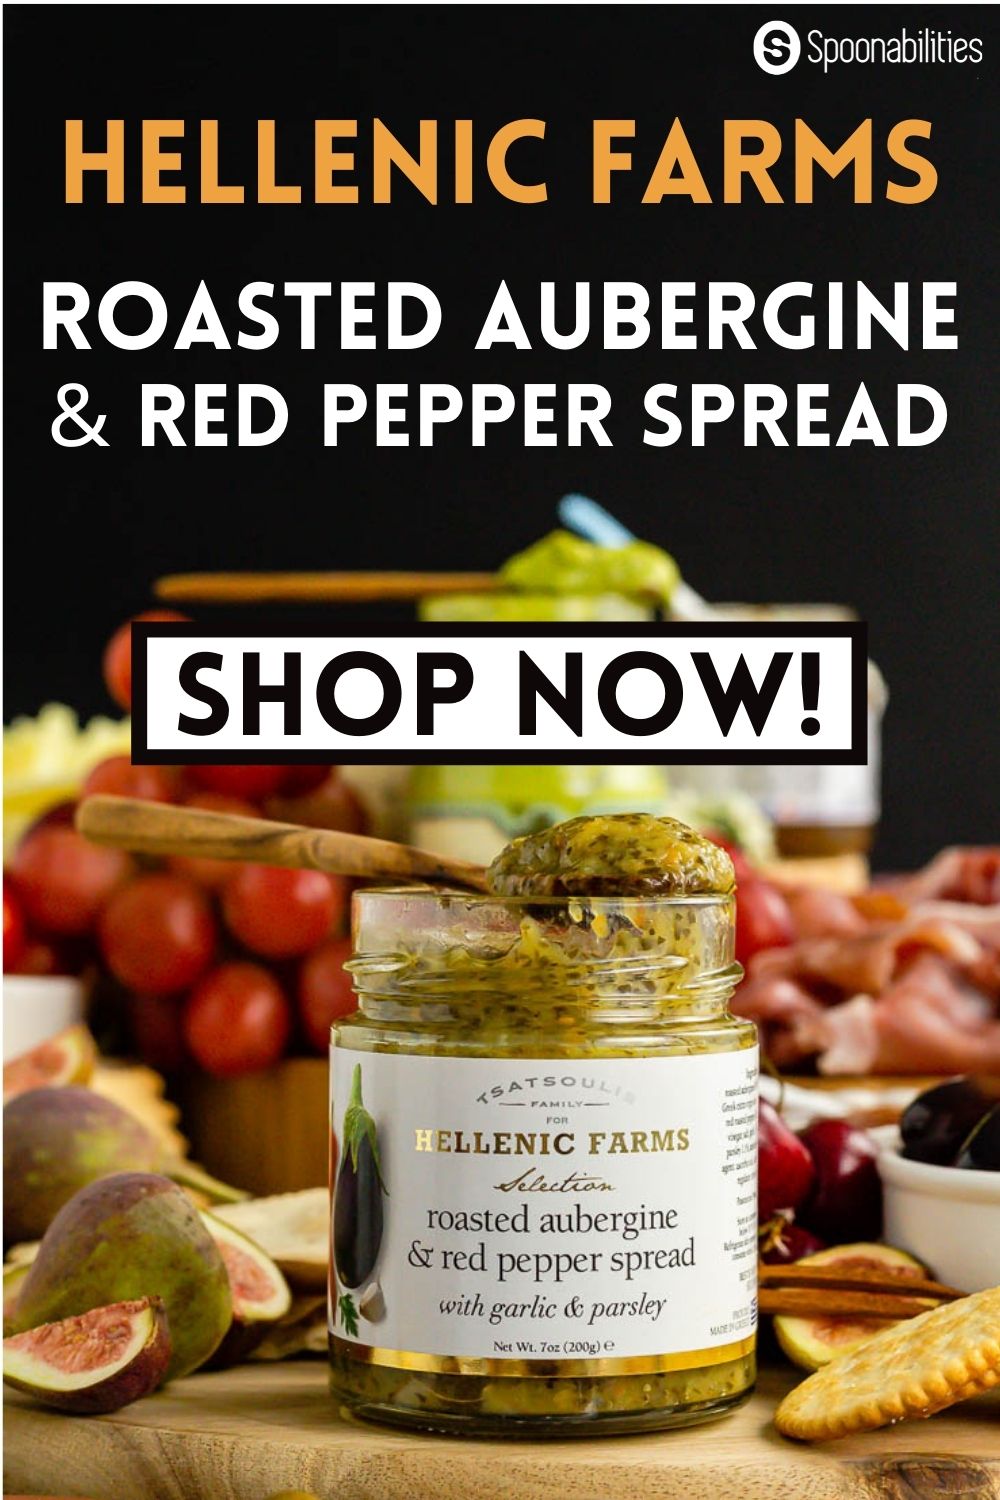 Roasted Aubergine and Red Pepper Spread 2-pack